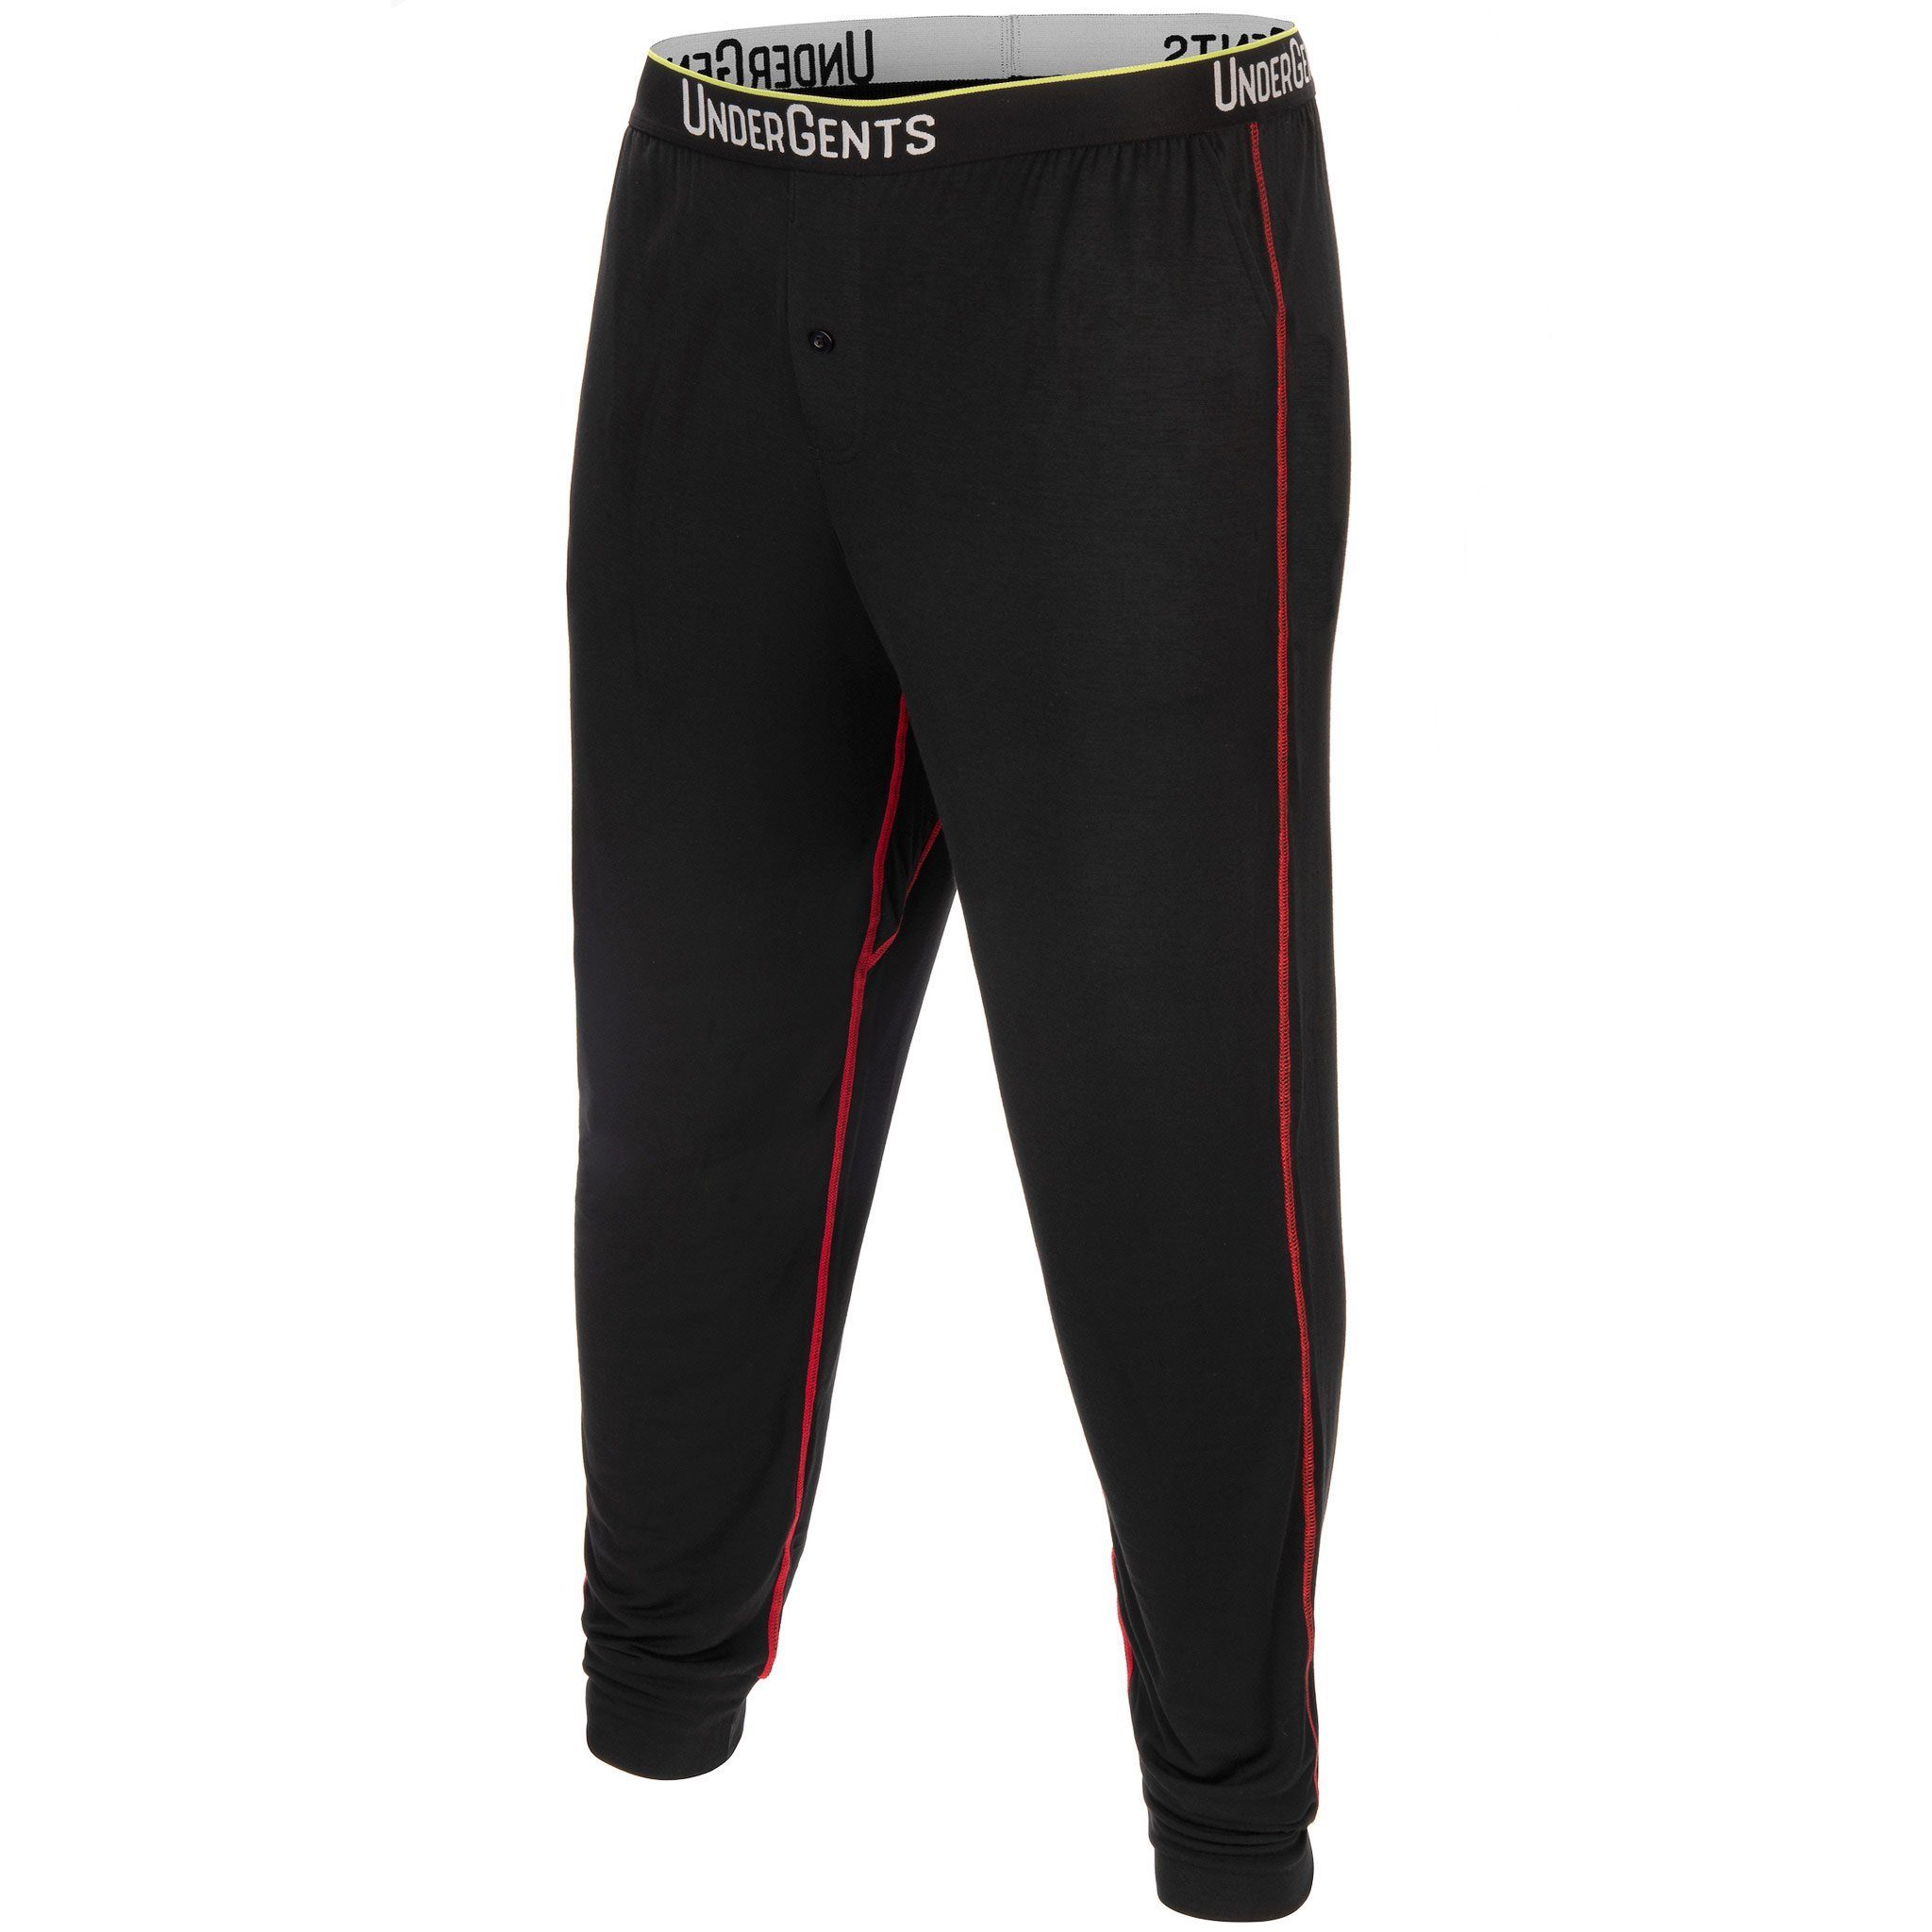 UnderGents Swagger Lounge Pants: Ultra Soft and Comfortable Lounge Wea